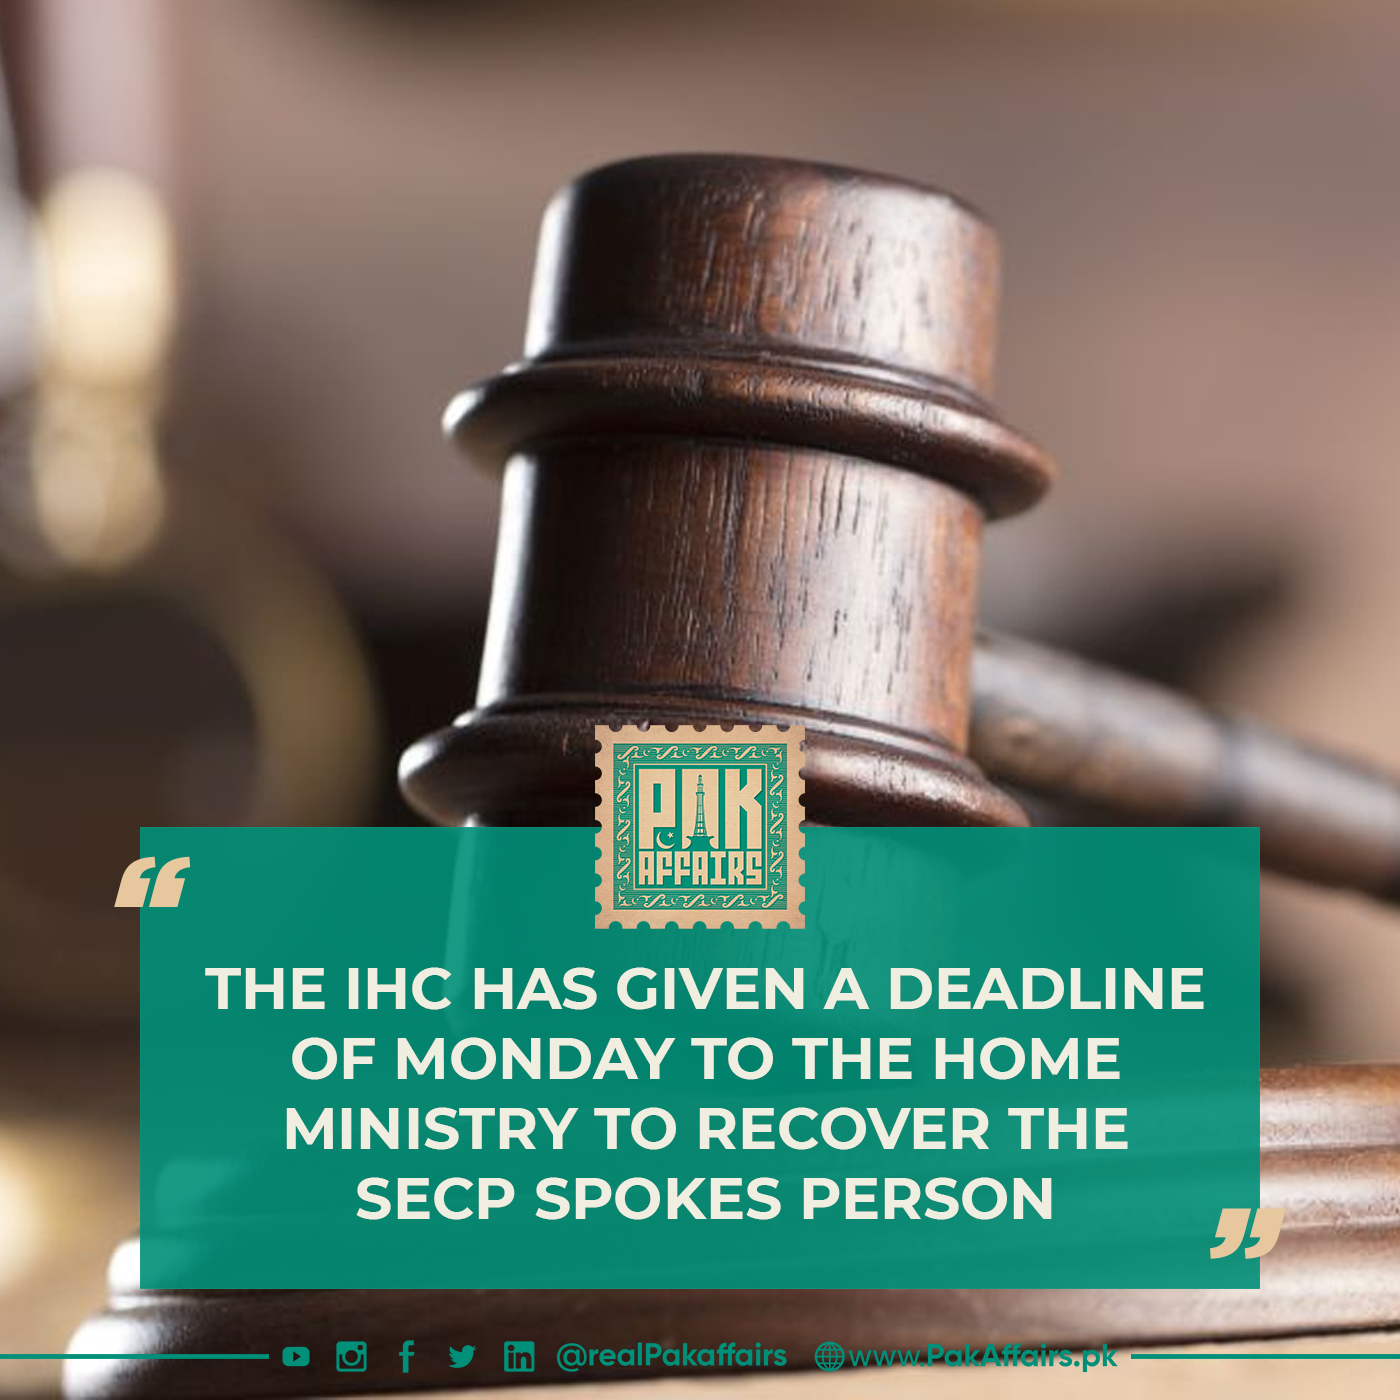 The IHC has given a deadline of Monday to the Home Ministry to recover the SECP spokes person